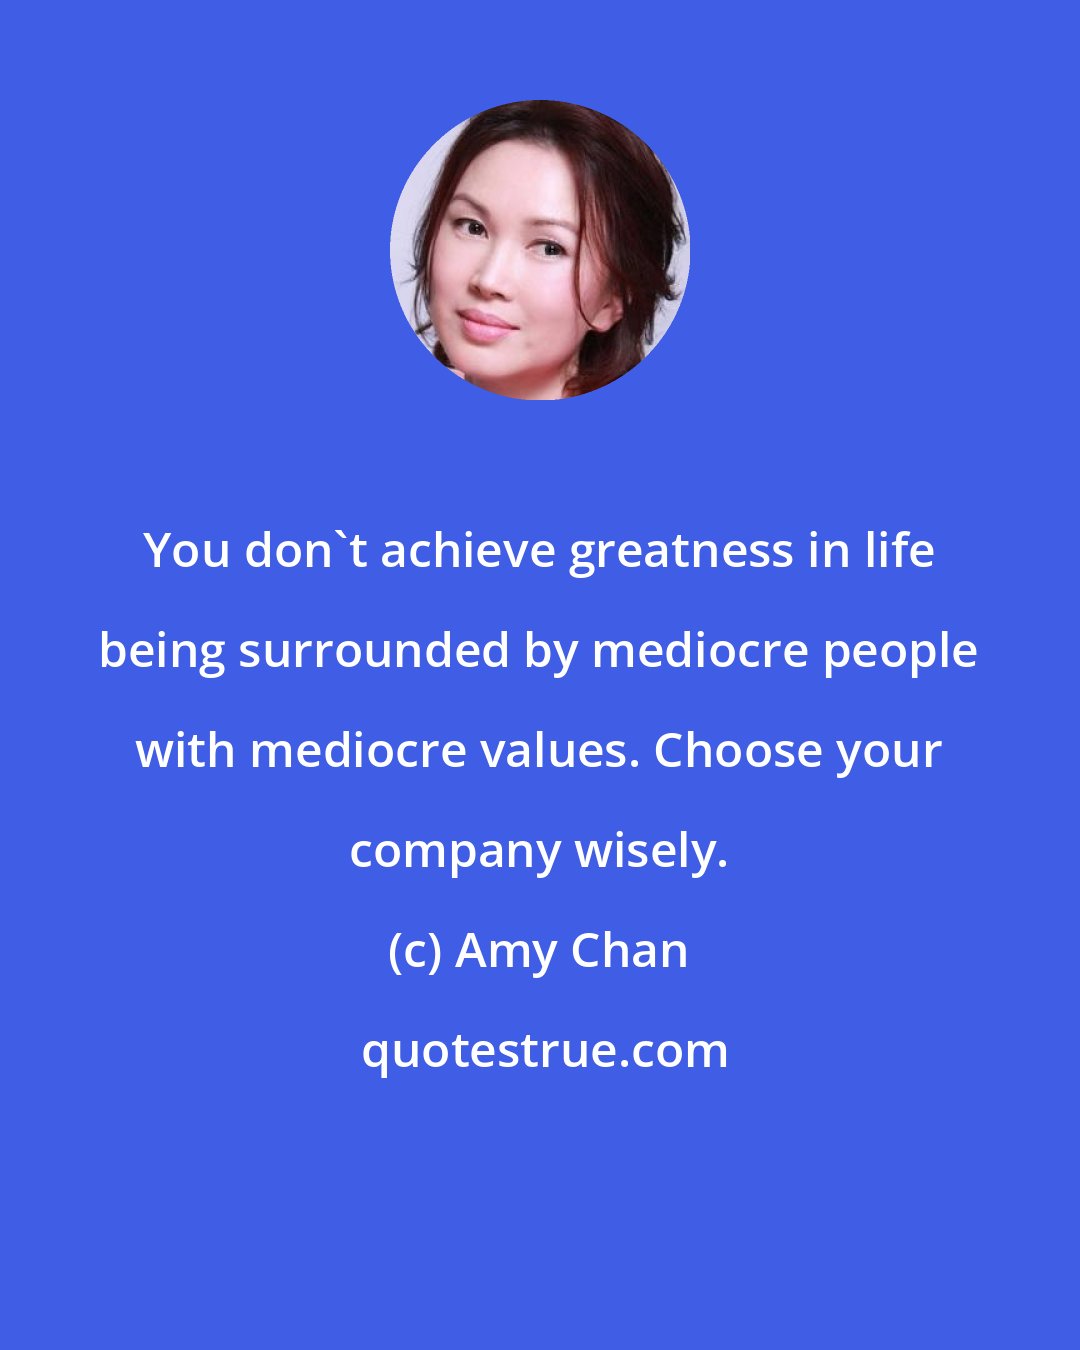 Amy Chan: You don't achieve greatness in life being surrounded by mediocre people with mediocre values. Choose your company wisely.